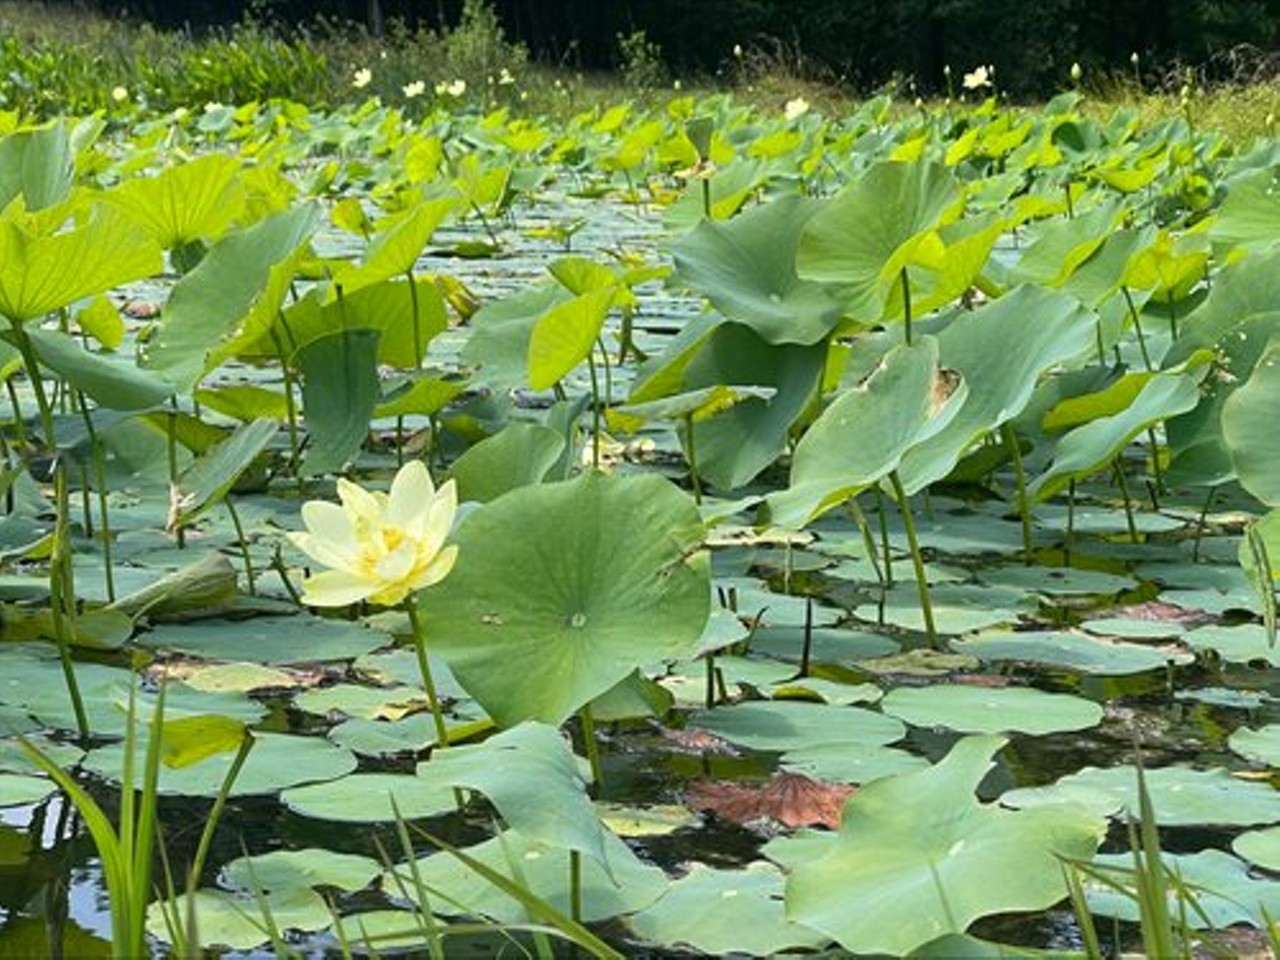 Brookside Reservation           
"Explore around the wetlands at Brookside Reservation to view the American lotus flowers in full bloom. The wetlands can be accessed by parking at the Cherry Tree Grove Picnic Area and taking the cut-through on the right side of the All Purpose Trail."